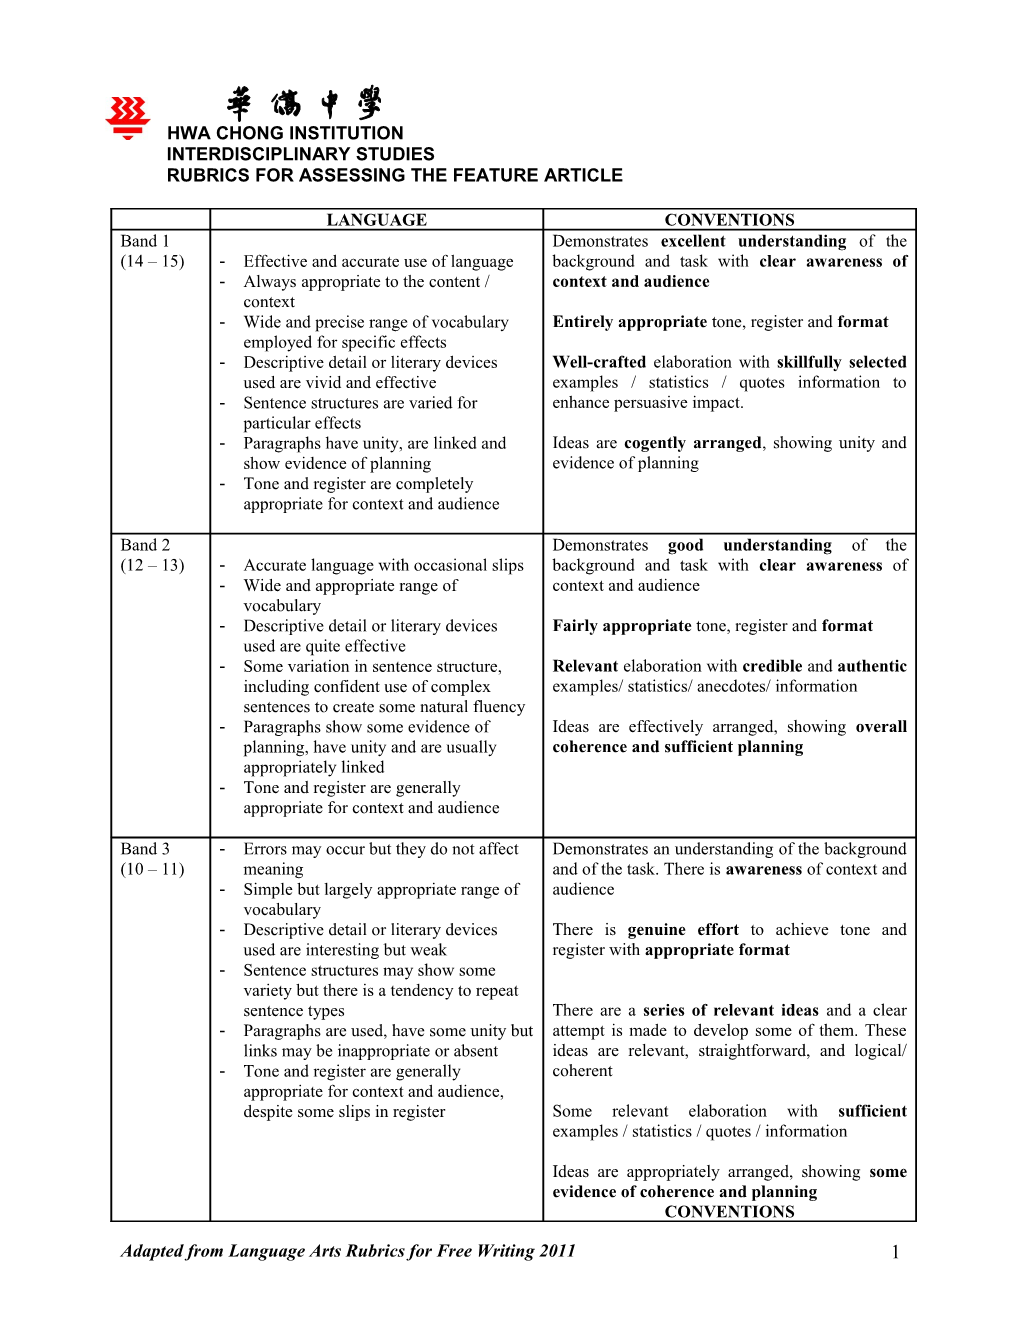 Rubrics for Assessing the Feature Article